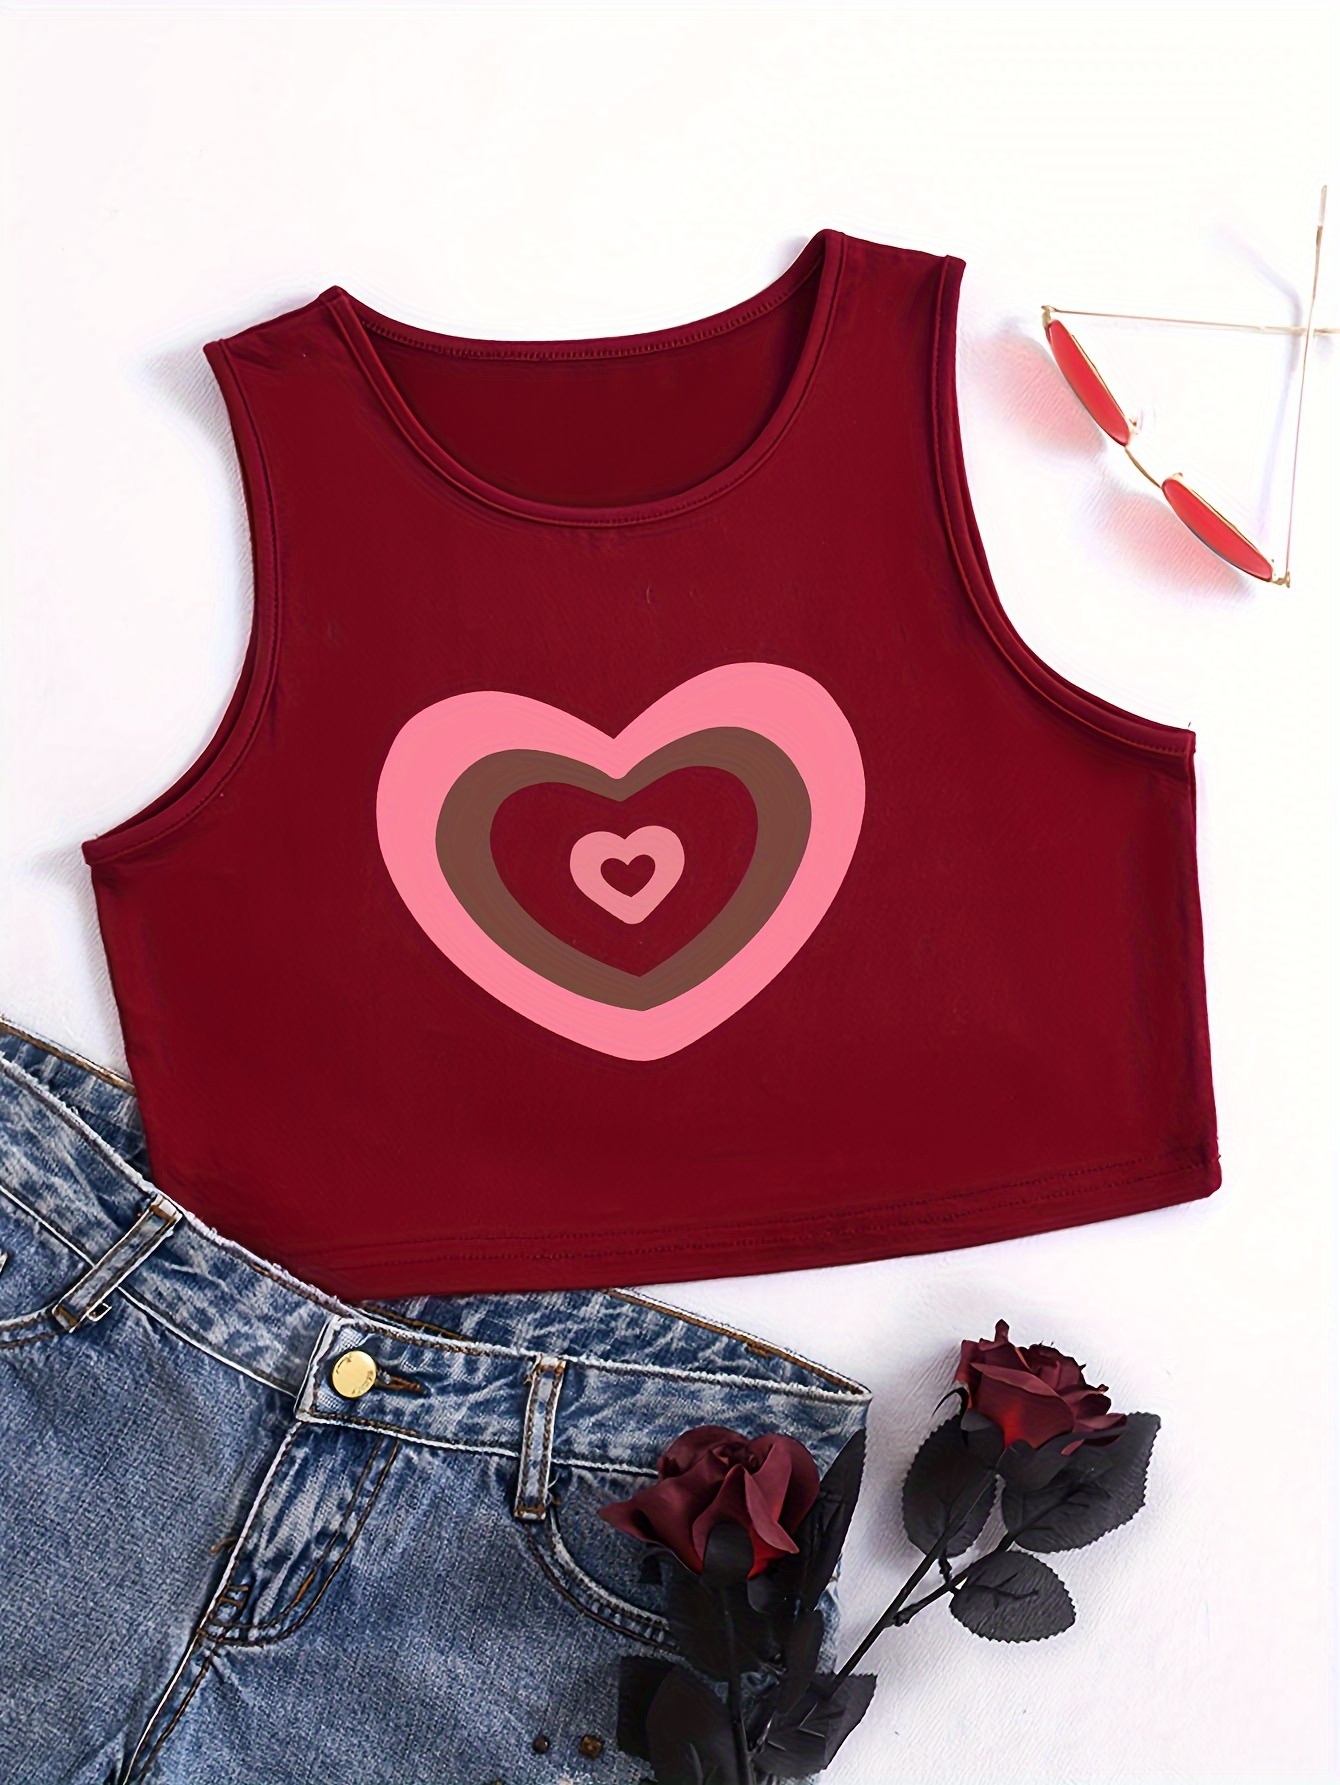 Heart Tank Top - Pink/Red